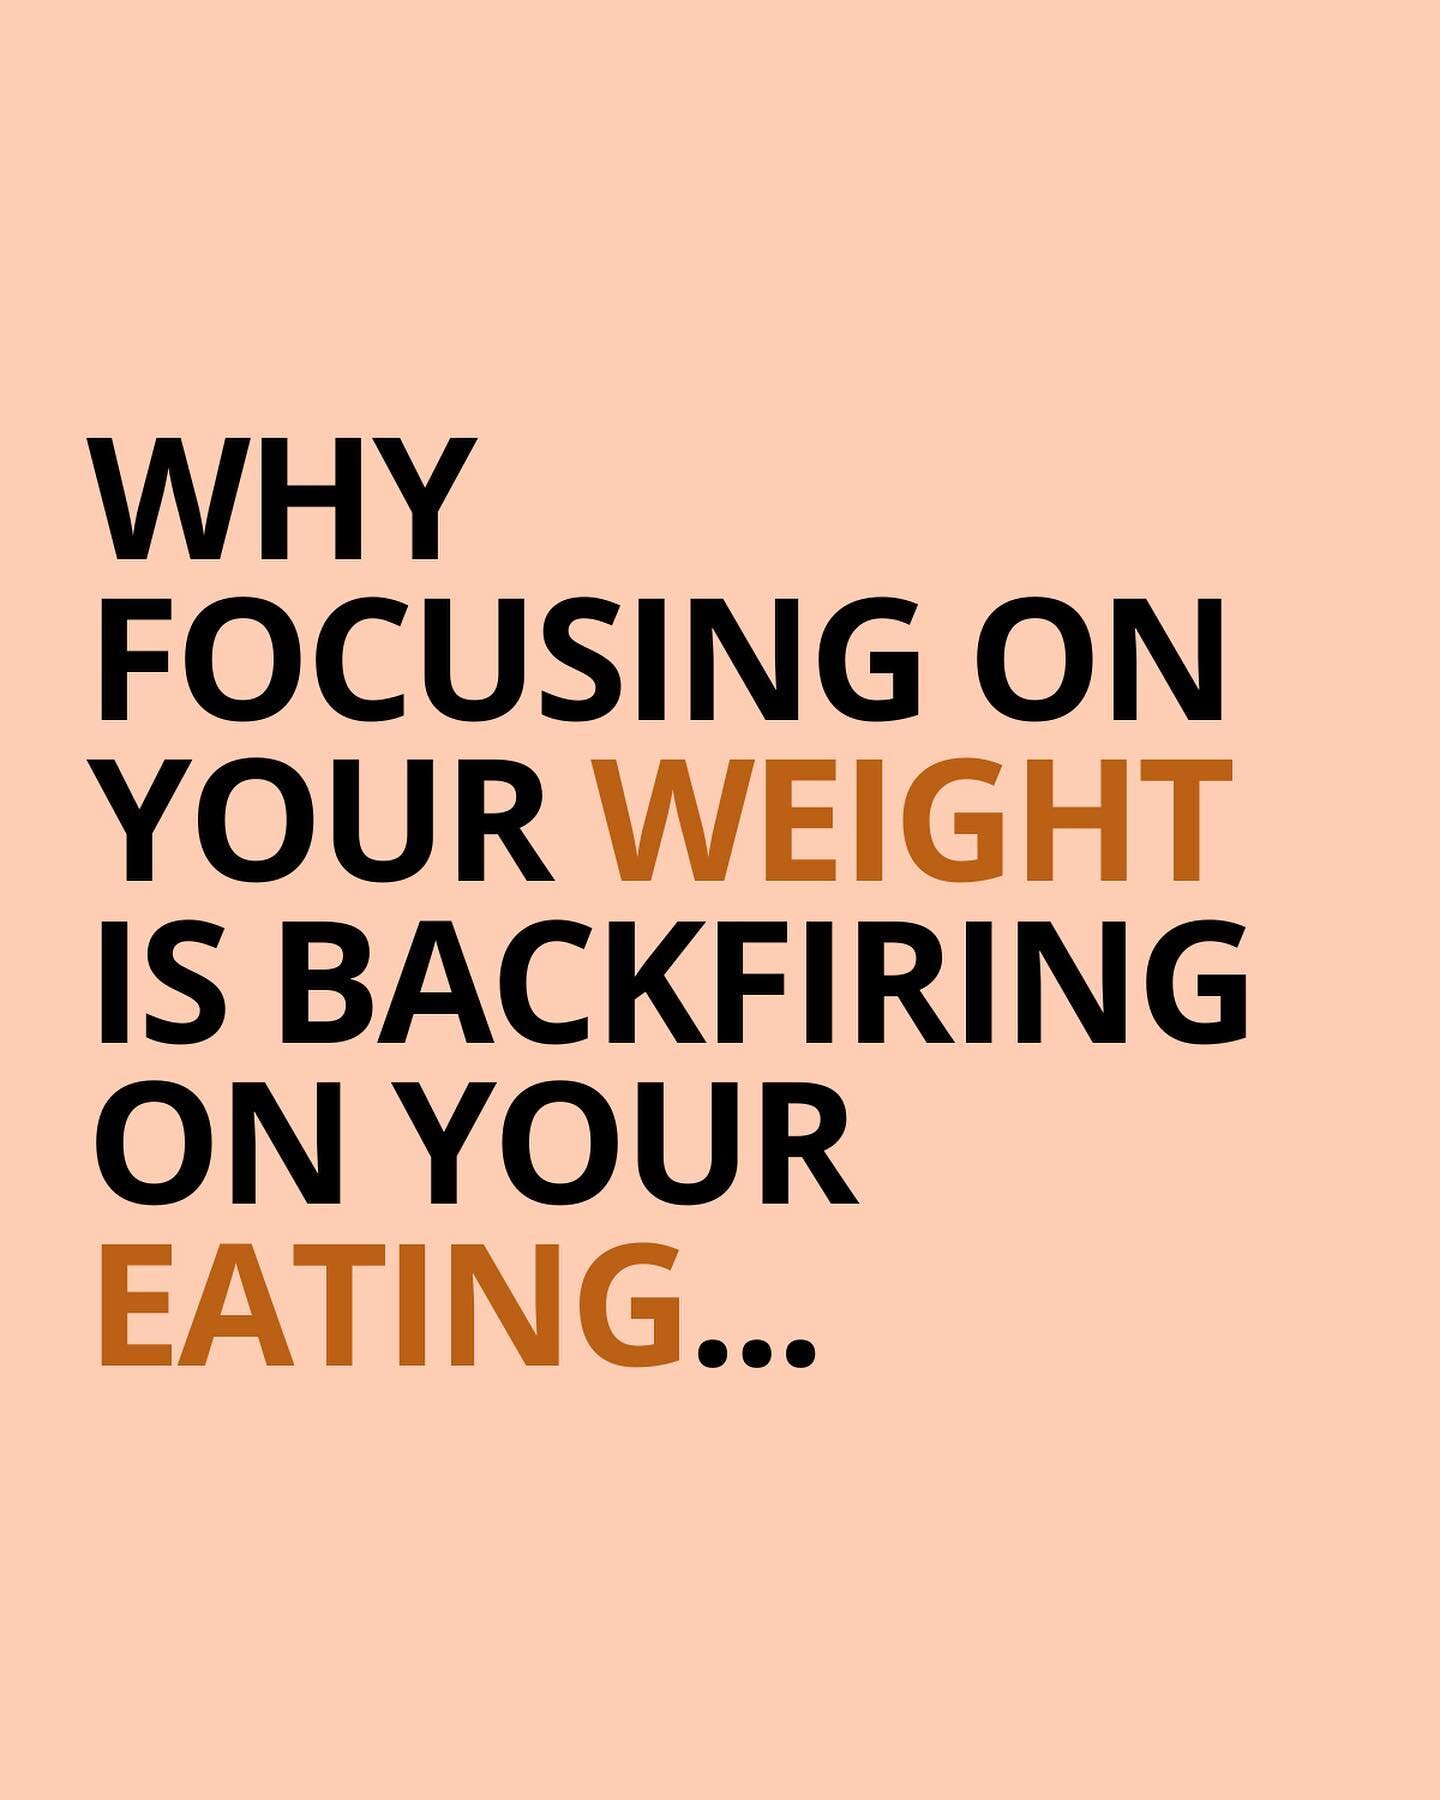 You&rsquo;re desperate to lose weight but nothing seems to &lsquo;work&rsquo; anymore? 👇🏼

😣Instead, you just end up feeling b@t$hit around food, loathe your body &amp; feel miserable about both?

💥Here&rsquo;s why the approach you&rsquo;ve been 